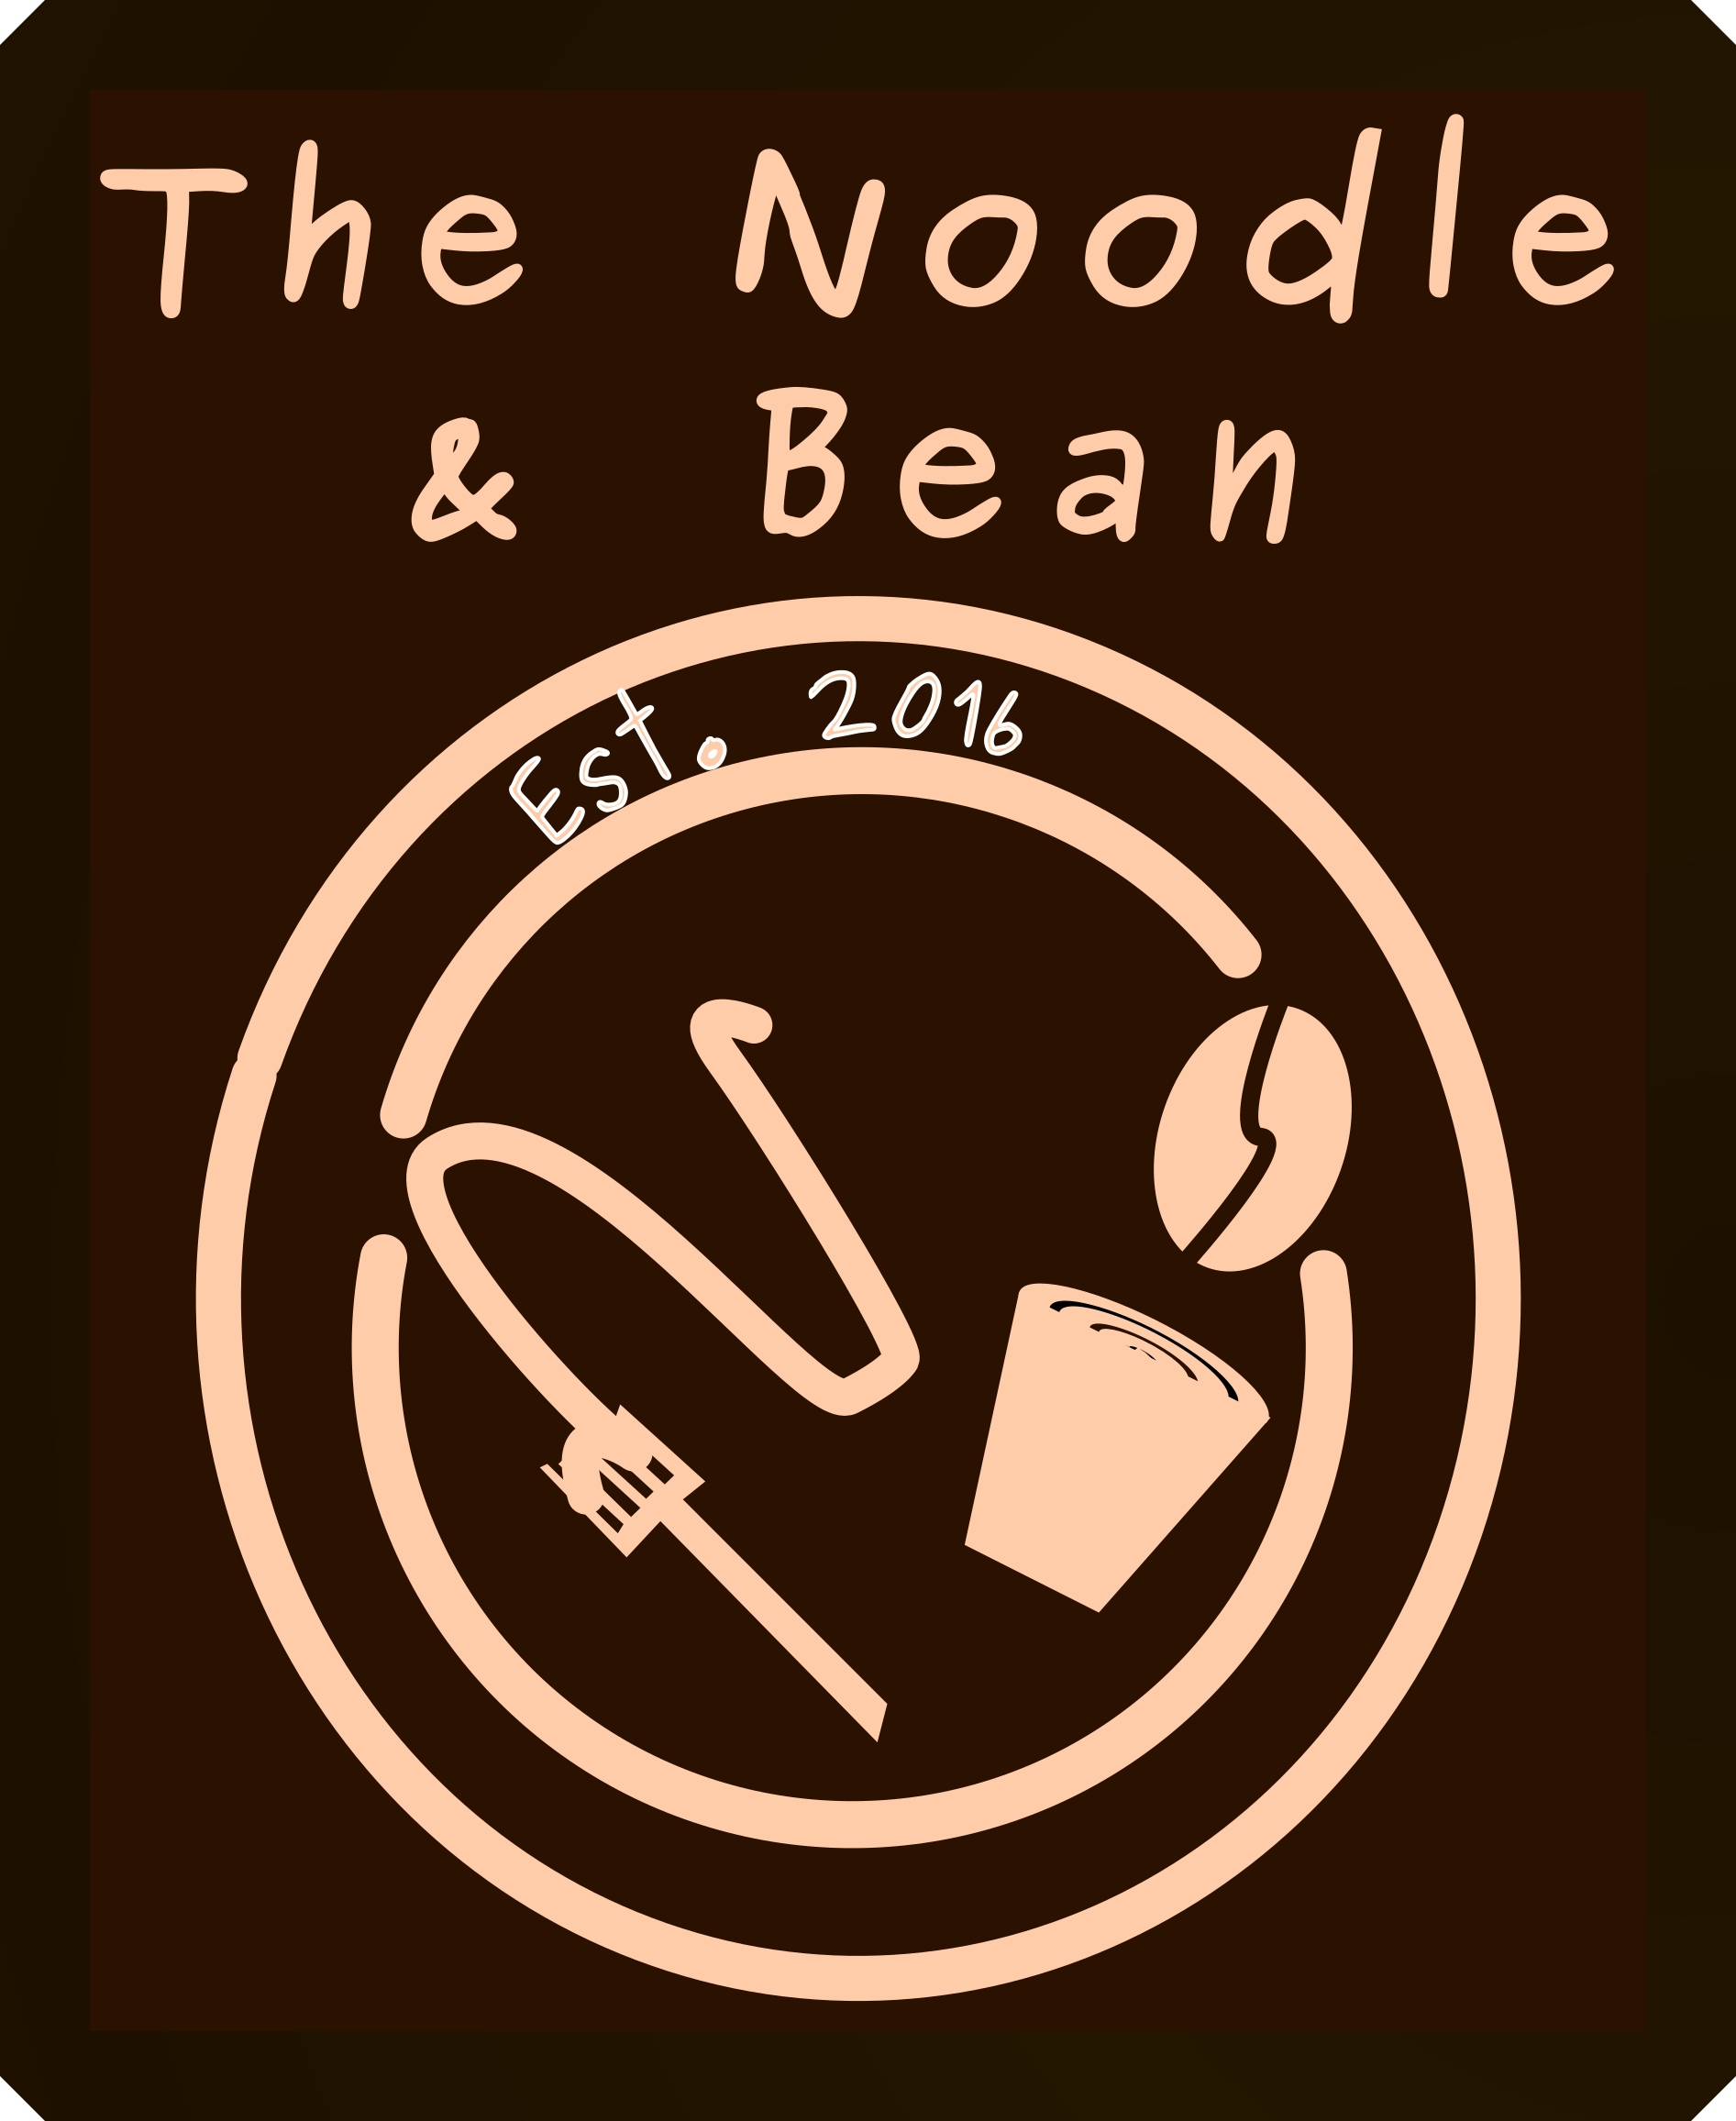 The Noodle & Bean Oct 2016 Logo. Own Work